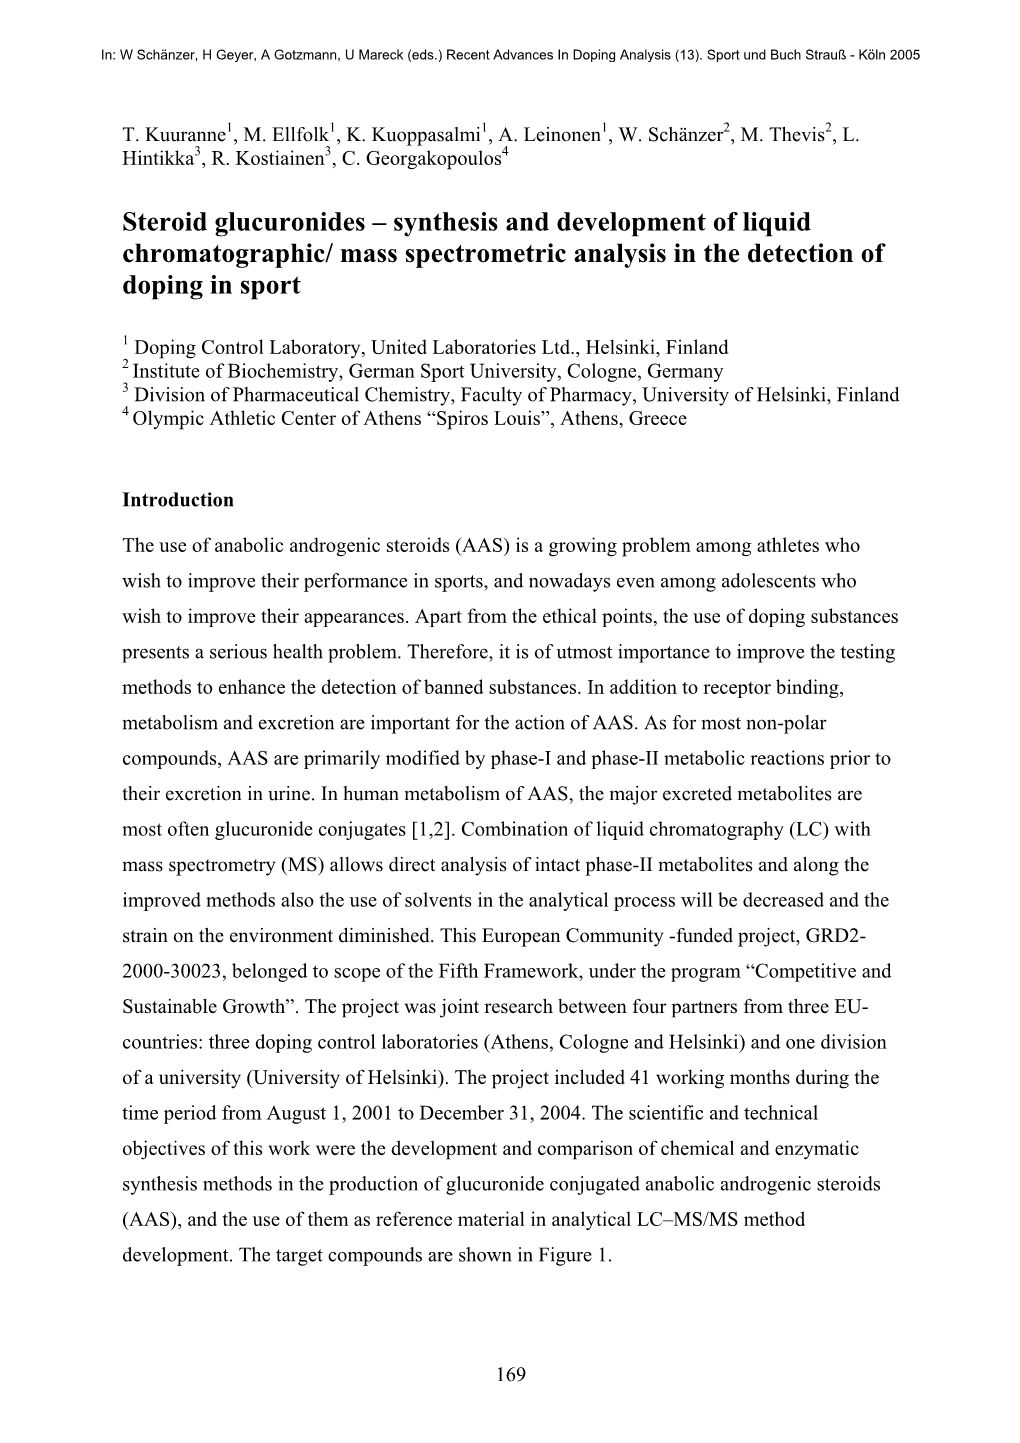 Synthesis and Development of Liquid Chromatographic/ Mass Spectrometric Analysis in the Detection of Doping in Sport